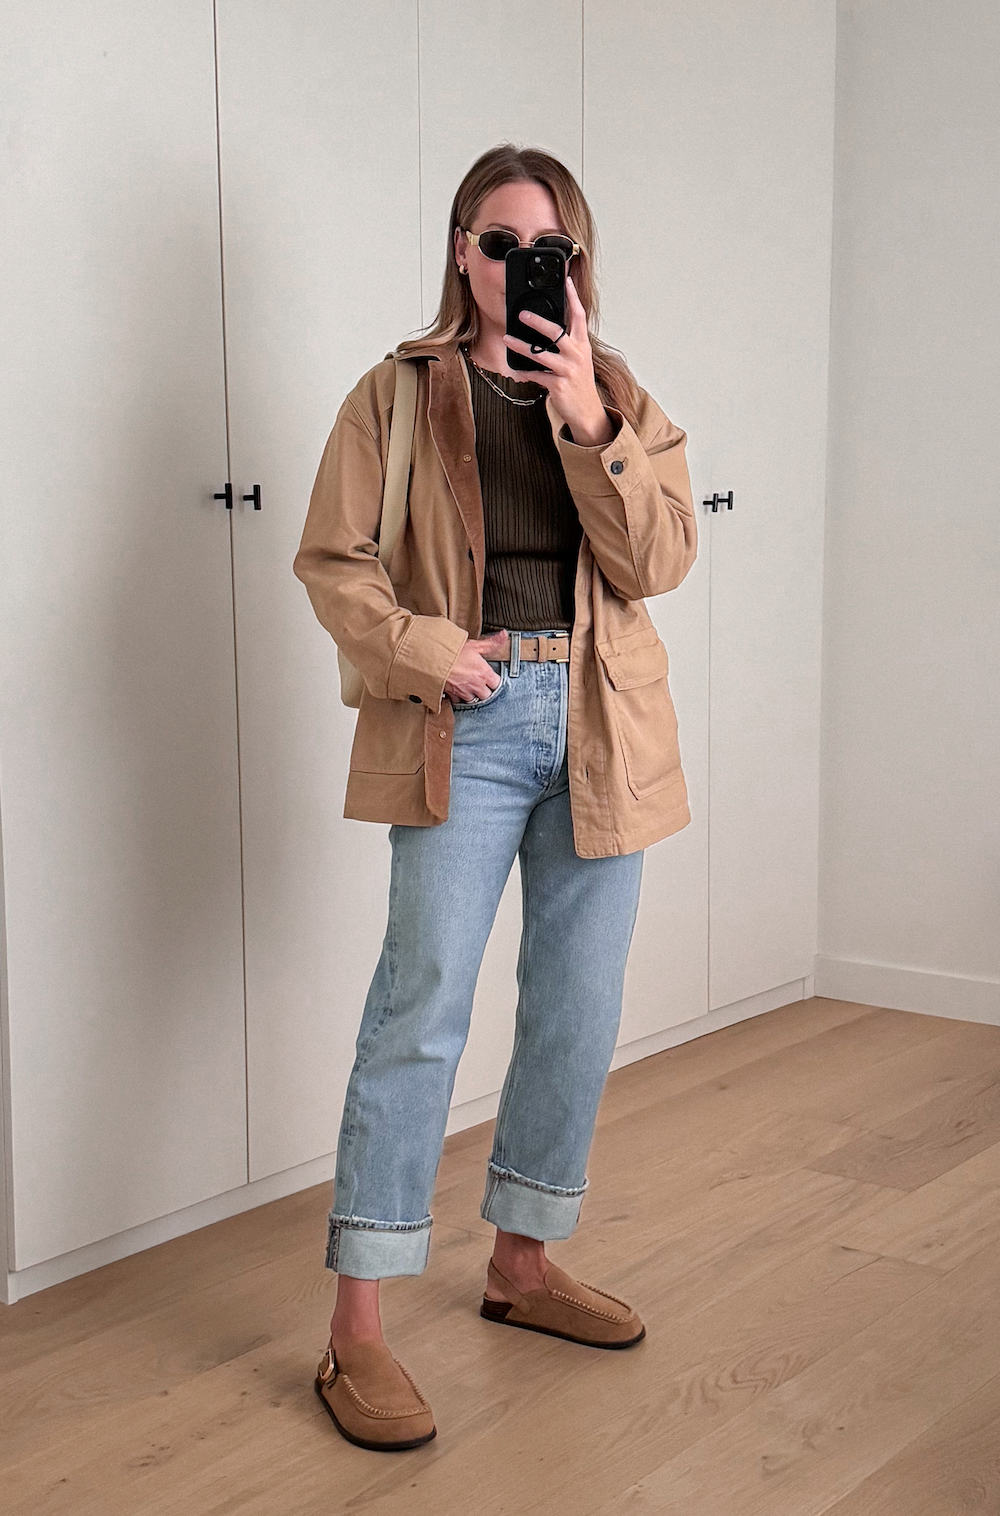 Christal wearing jeans, a brown top, a tan utility jacket and Ugg shoes.